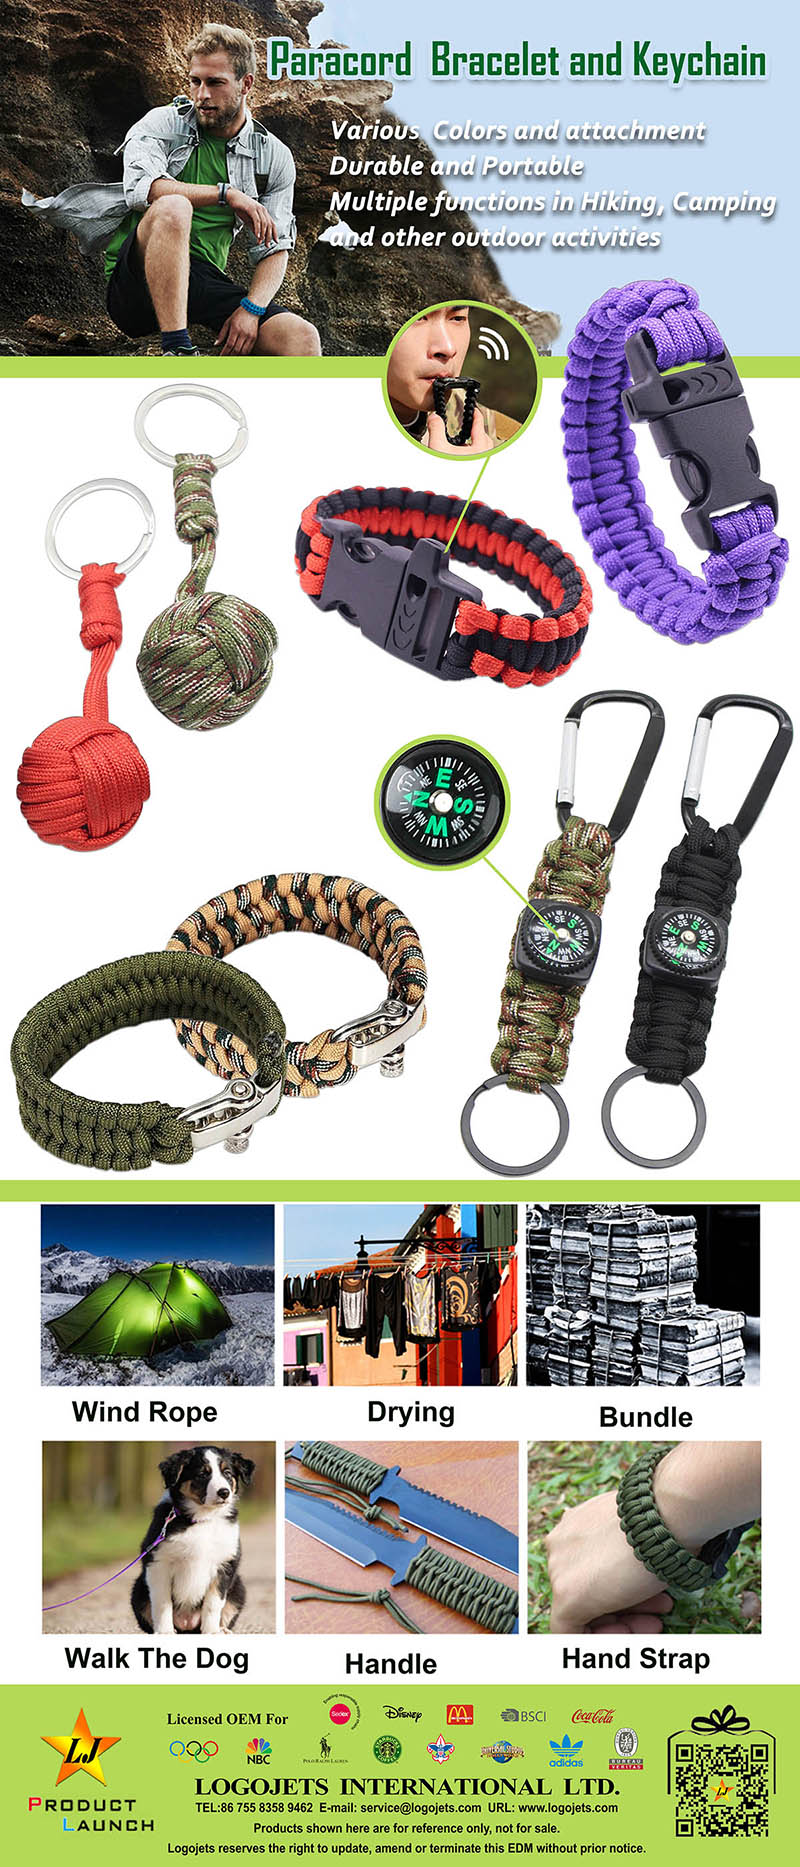 Paracord Bracelet and Keychain